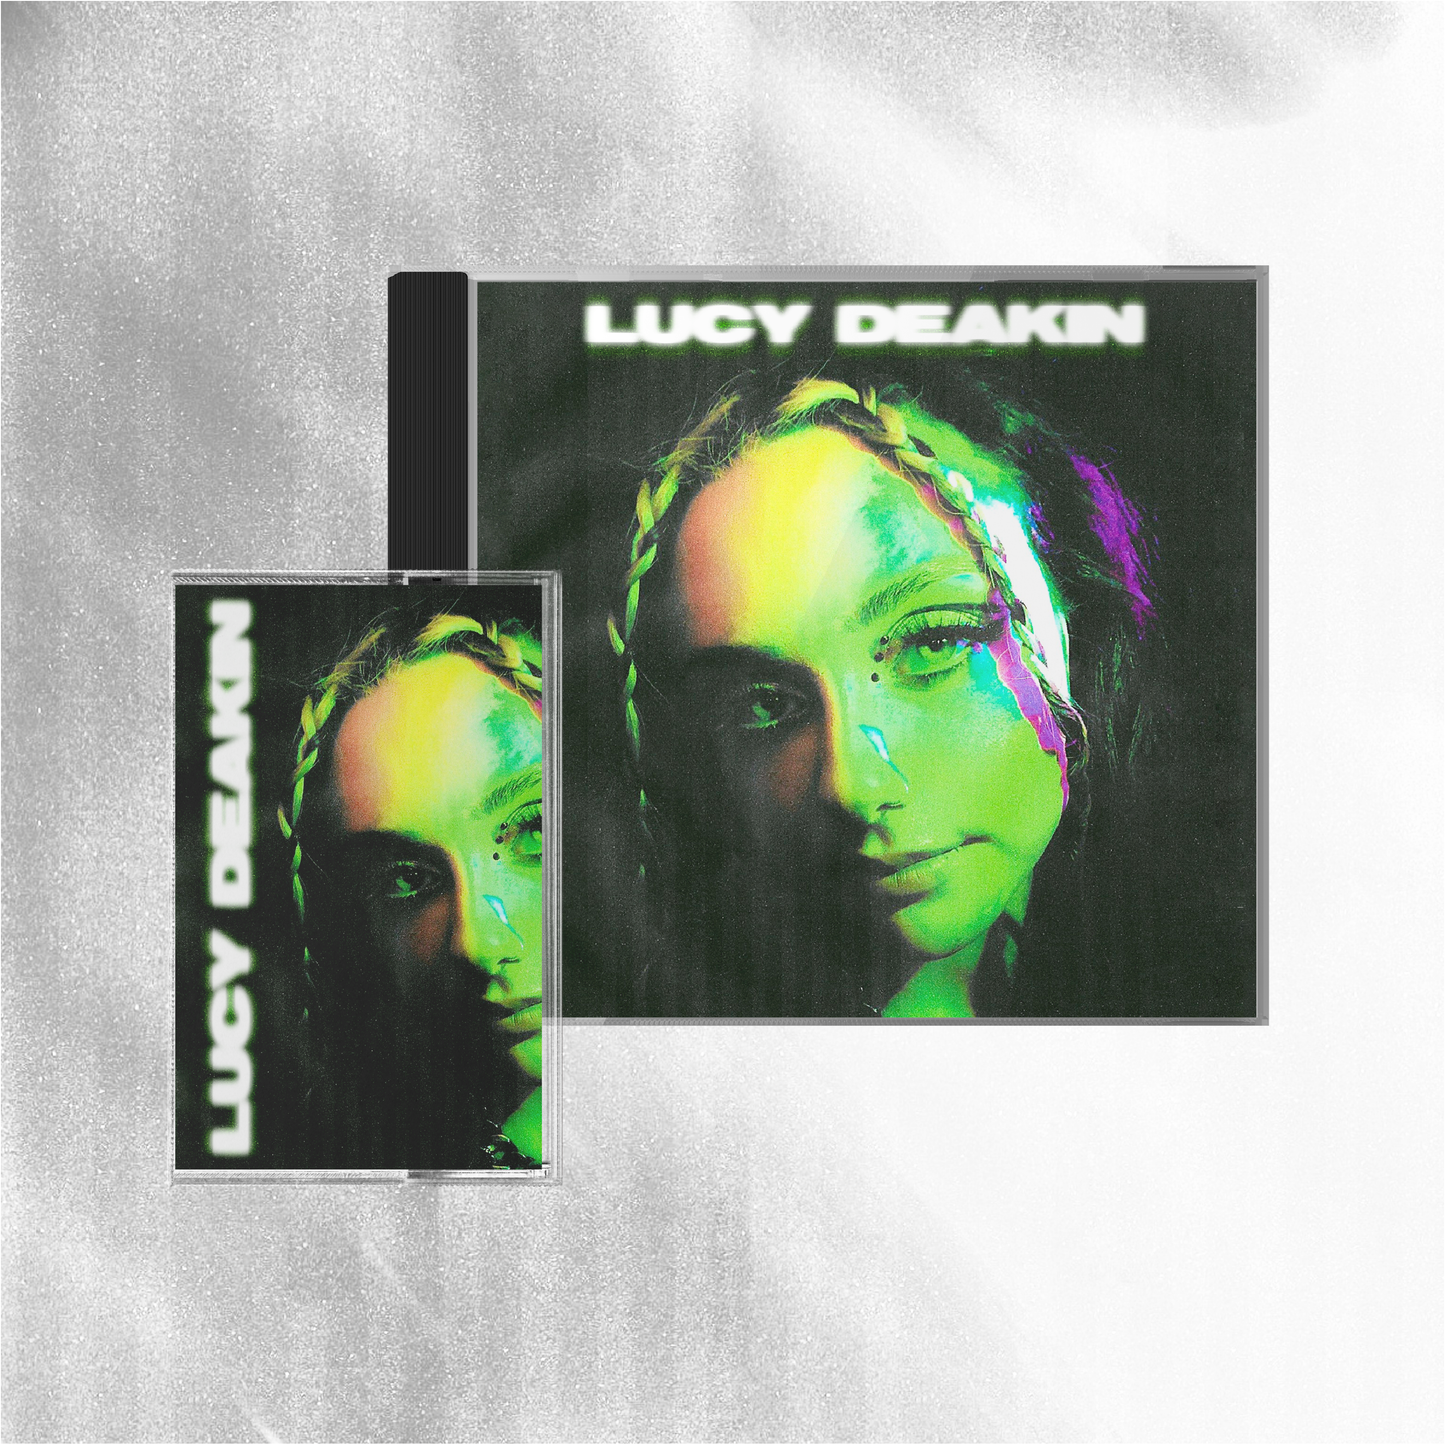 Lucy Deakin - 'in your head i'm probably crying' EP - Bundle - CD + Cassette